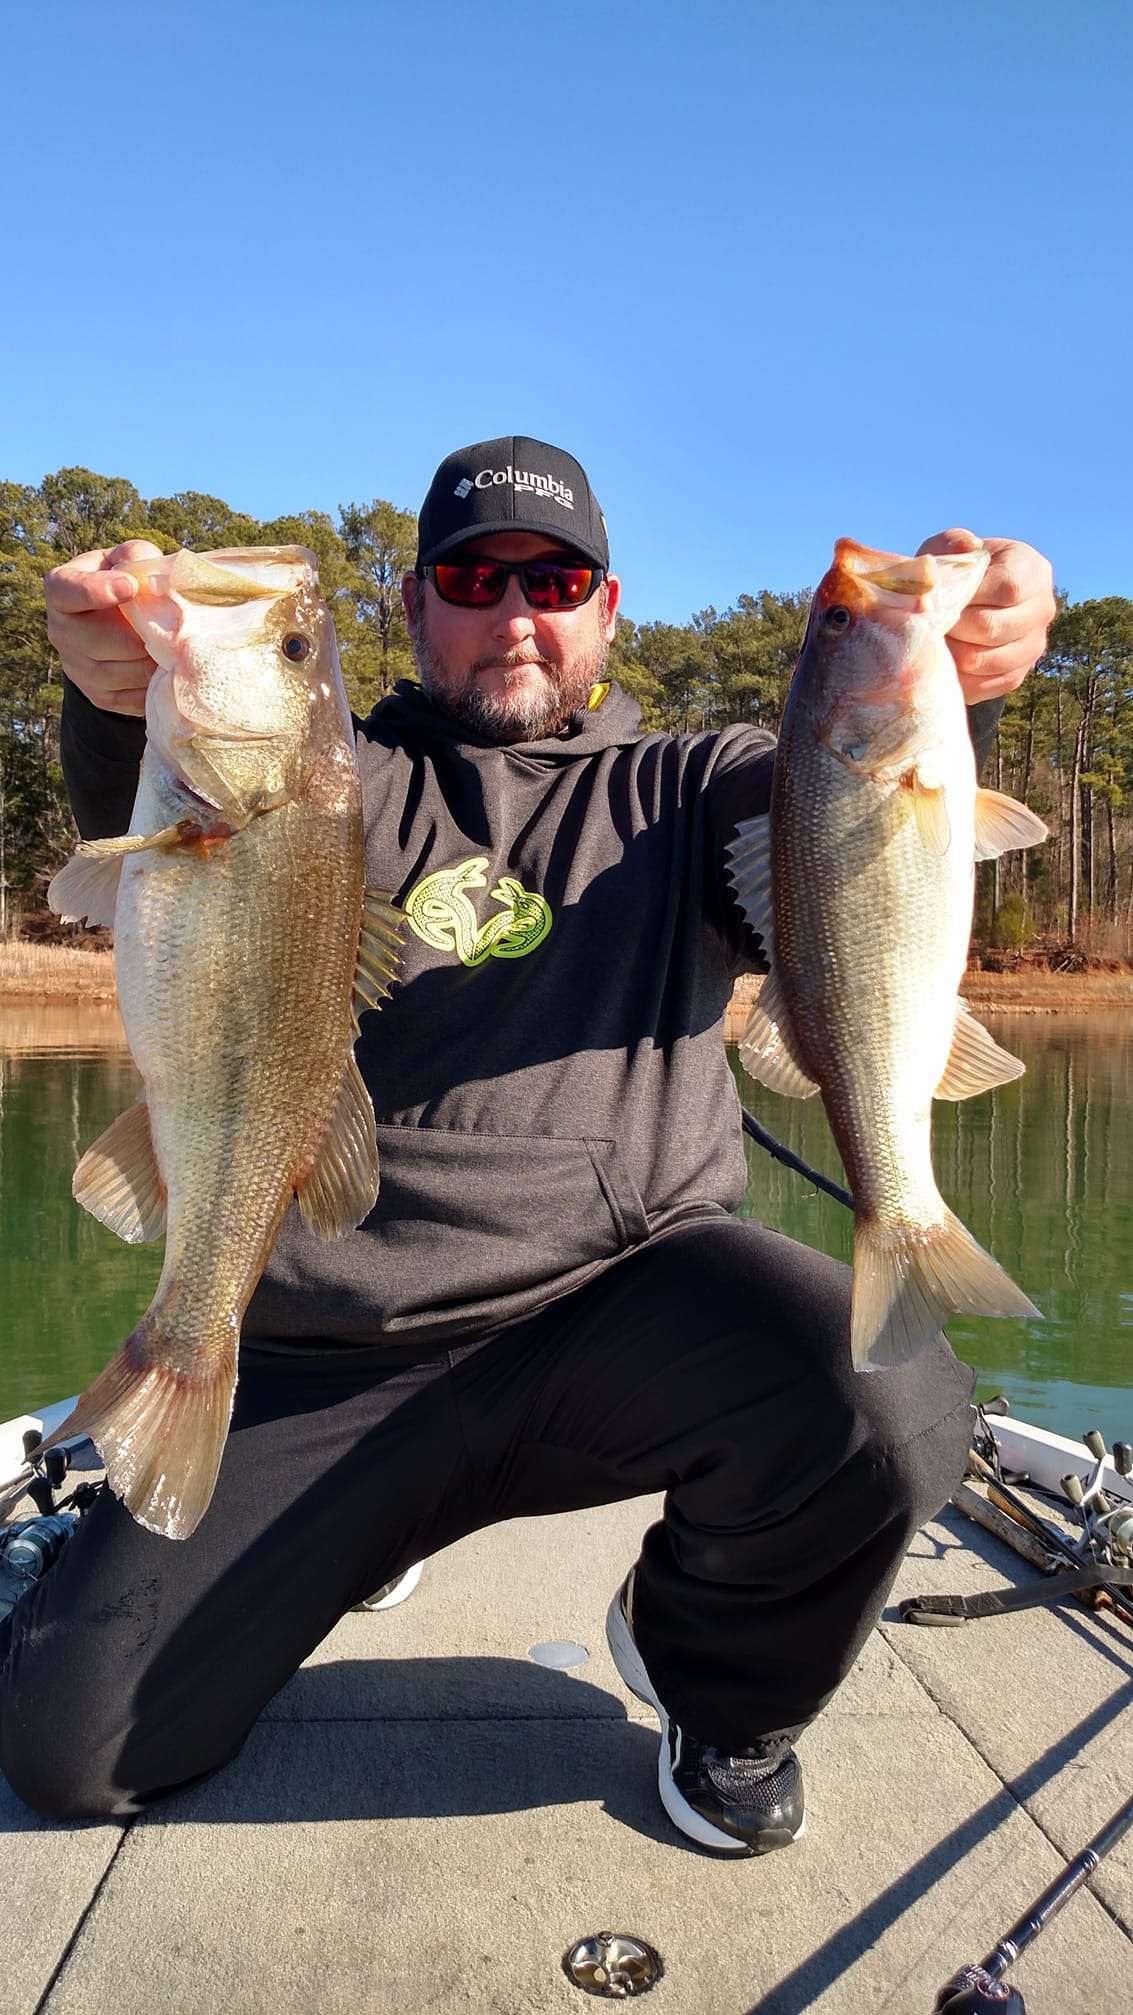 Robby Hunnicutt caught a 6-pound and 3-pound bass at Clarkshill.